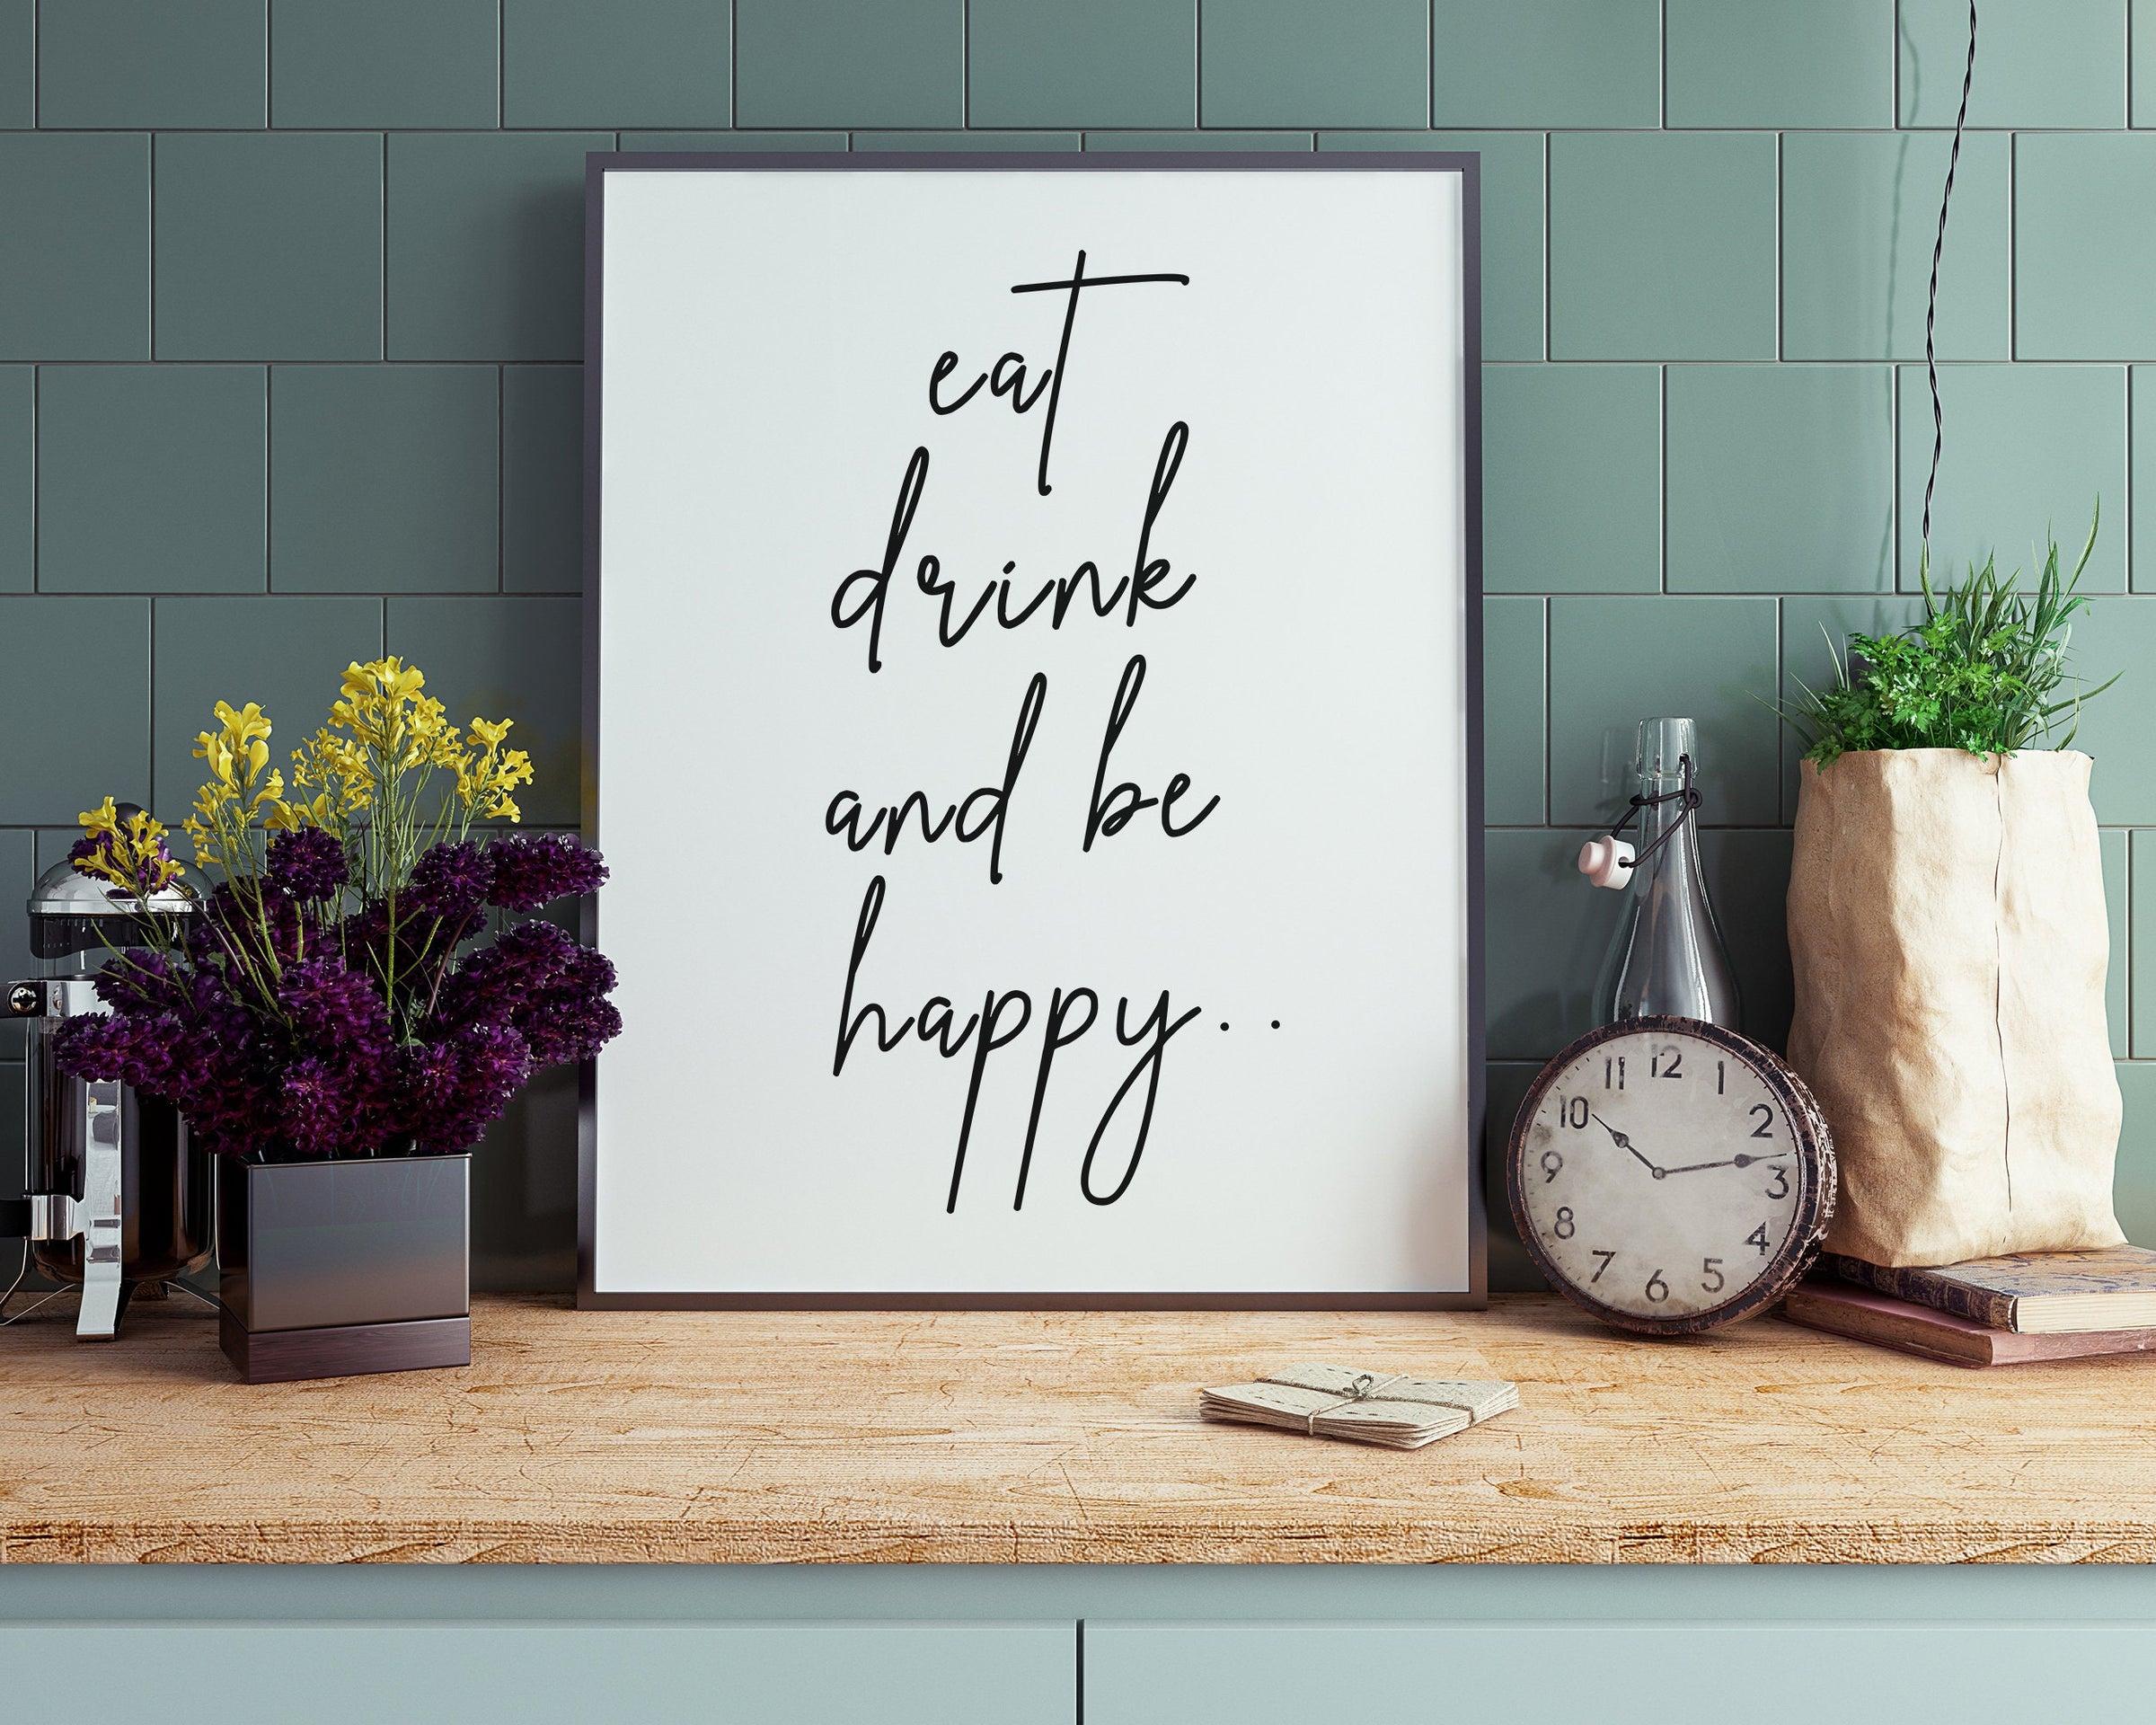 Eat Drink Enjoy Food Makes Me Happy Time For Tea Wall Art Kitchen Post –